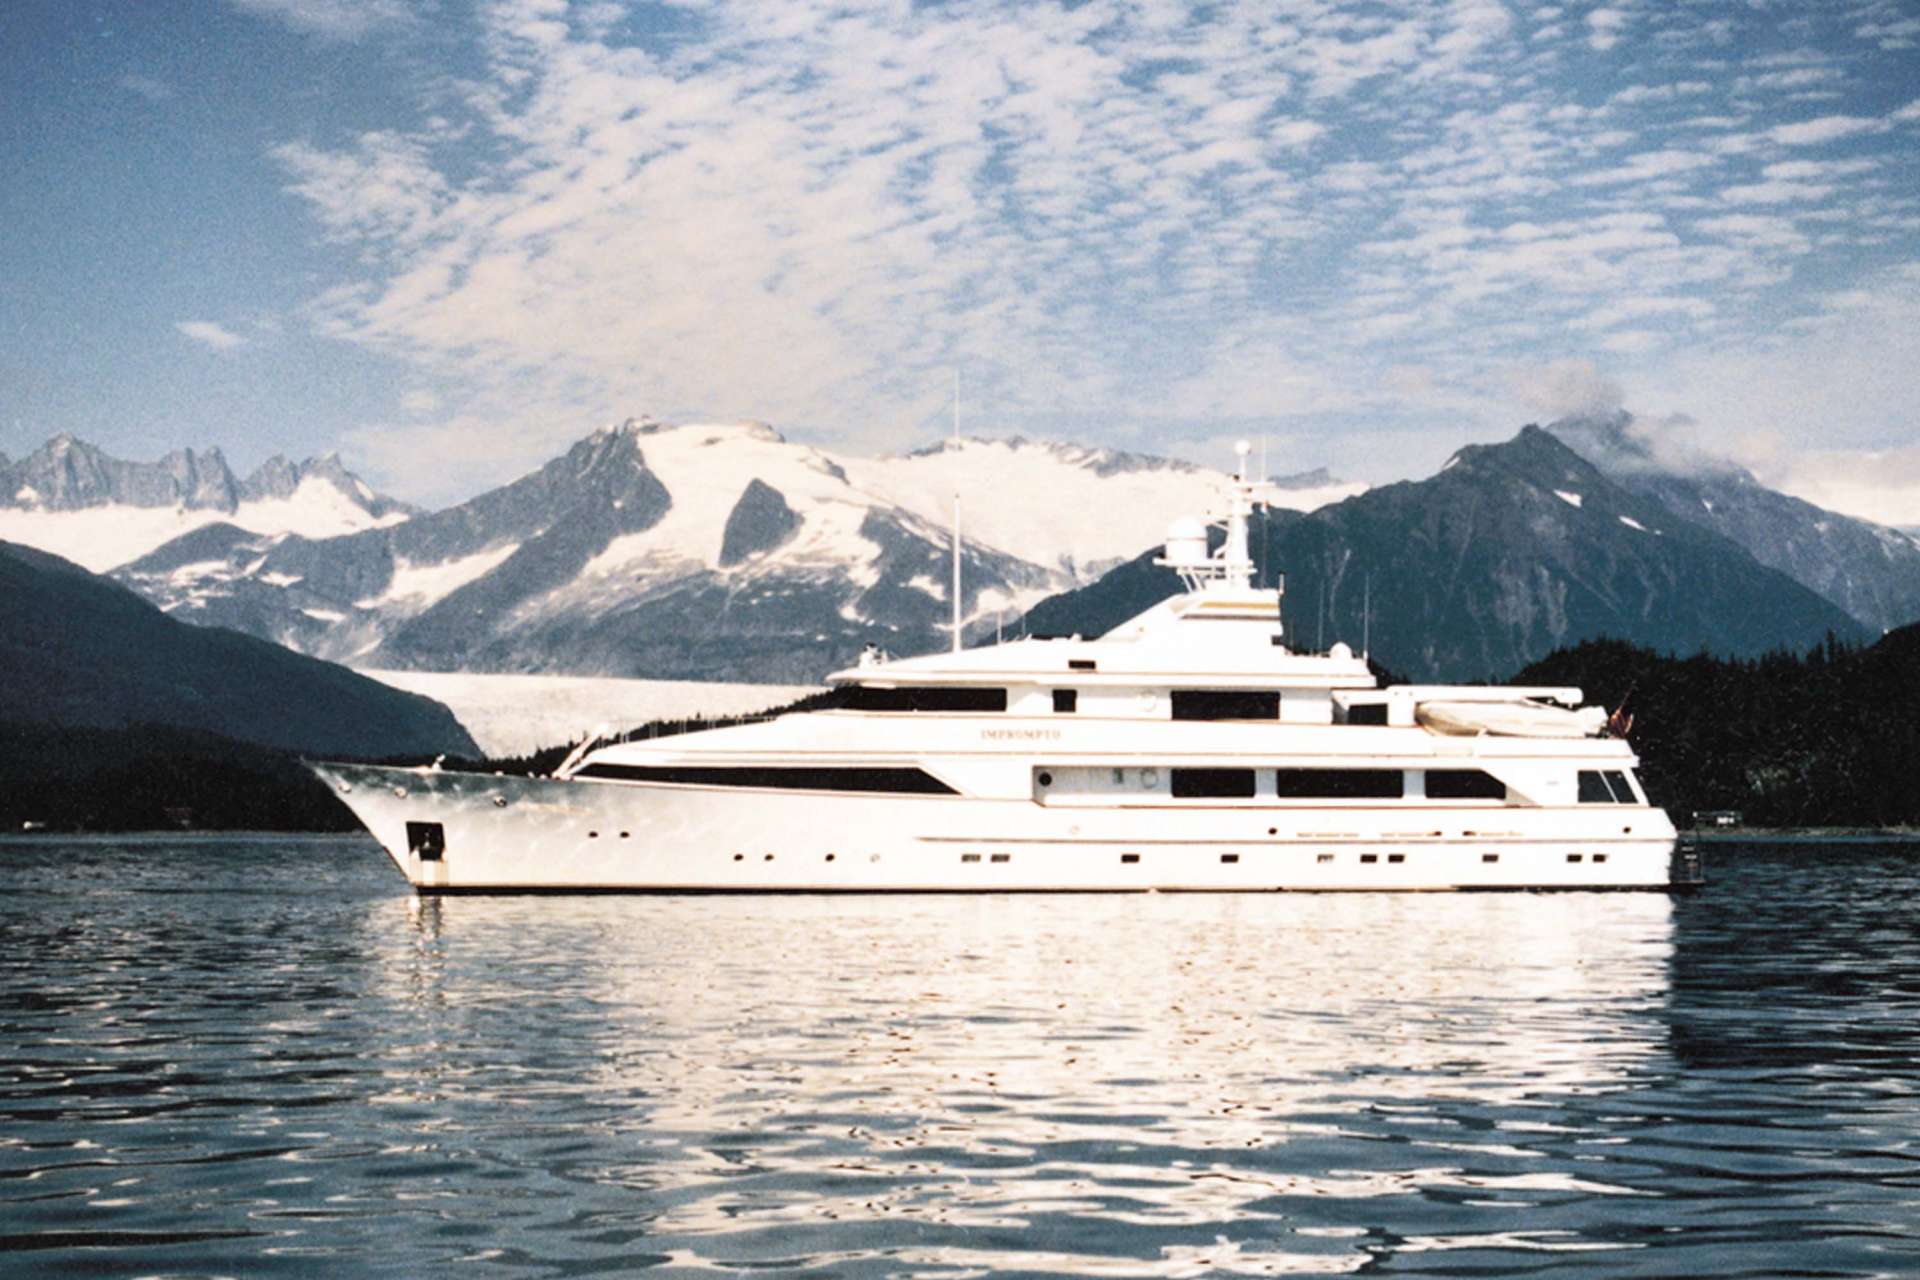 Princess Yachts: Bernard Arnault and his co-shareholders ready to open the  capital